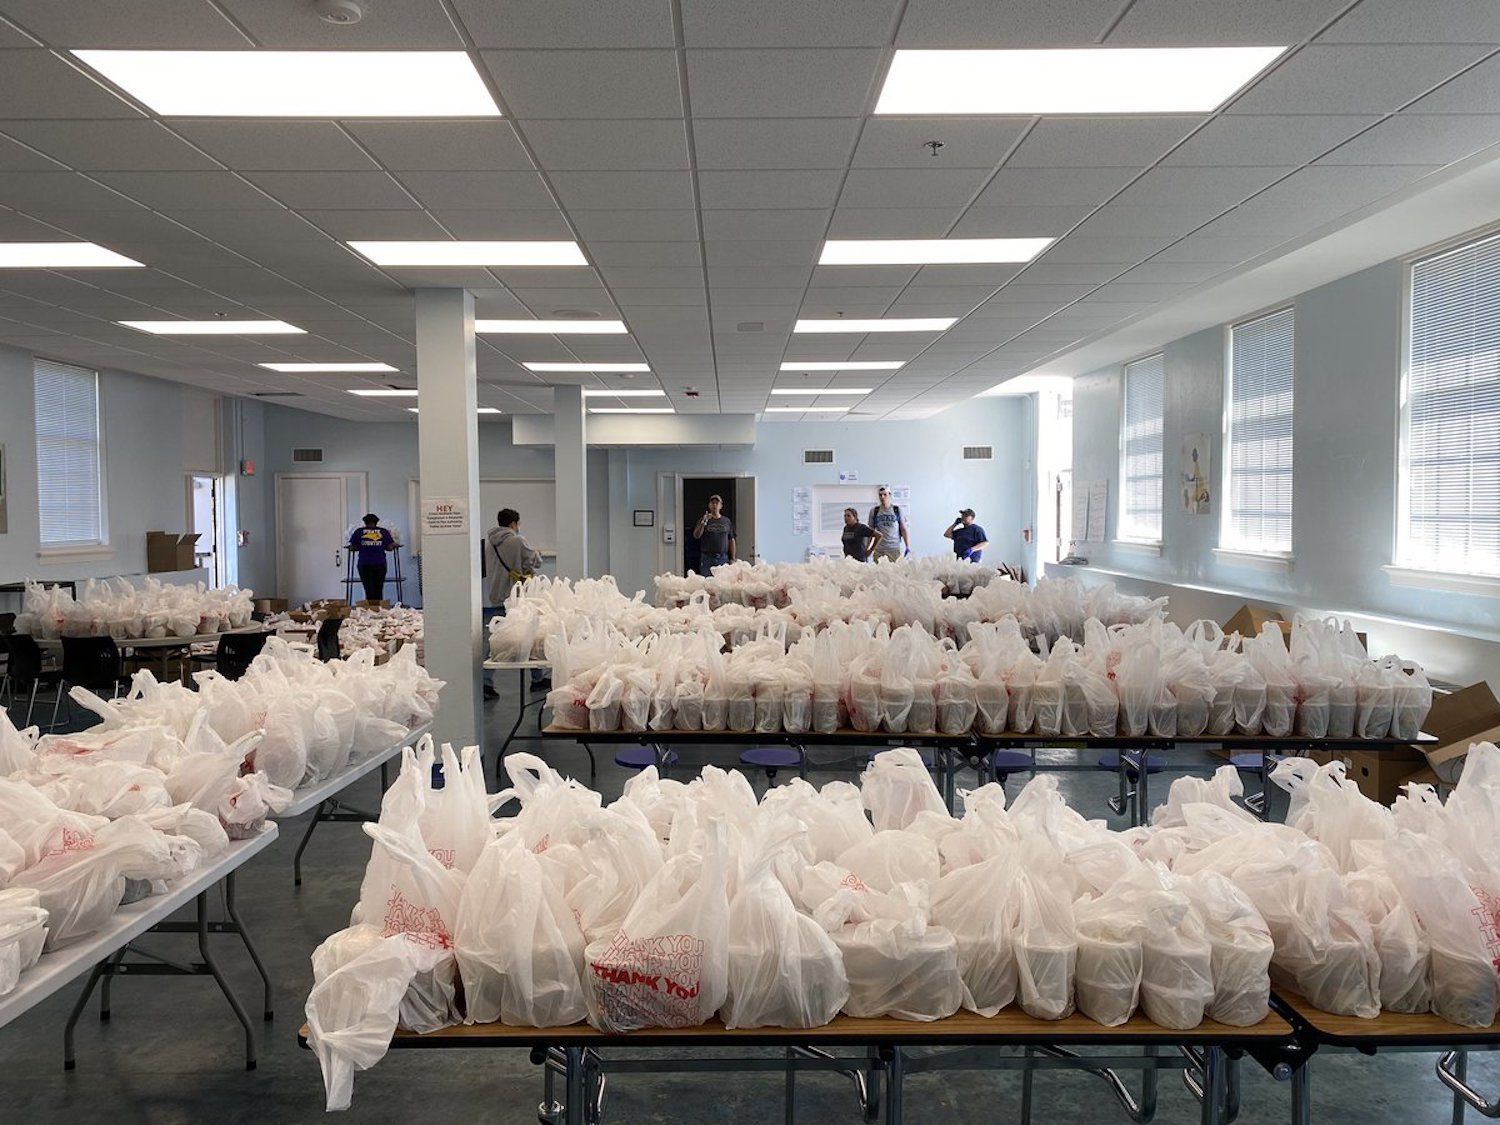 Tables filled with plastic take-out lunch bags in Durham, North Carolina.